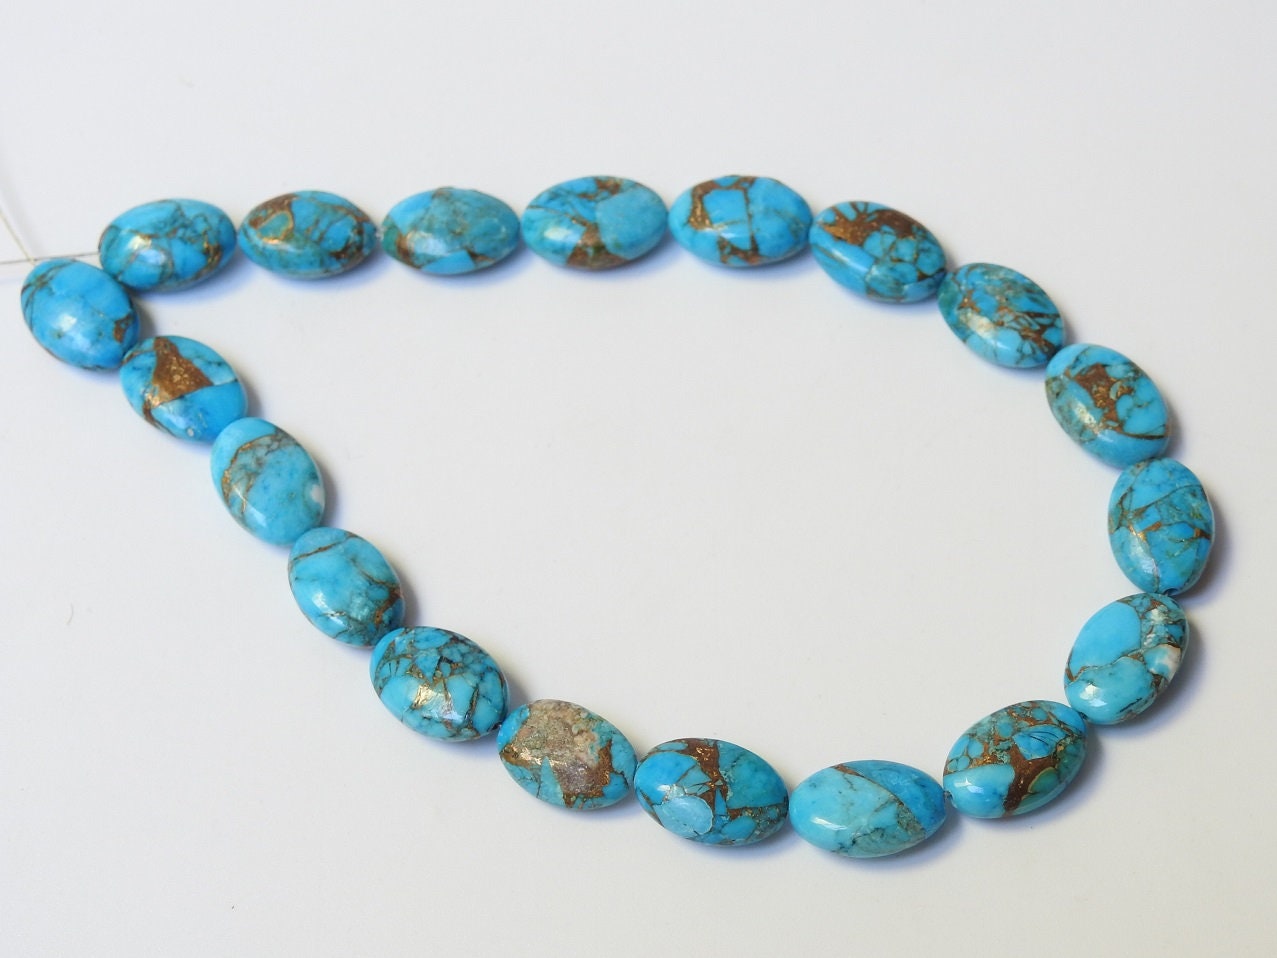 Copper Turquoise Smooth Oval Shape,Nugget,Loose Stone,Handmade Bead,For Making Jewelry 10 Piece Strand 12X8 MM Approx | Save 33% - Rajasthan Living 14